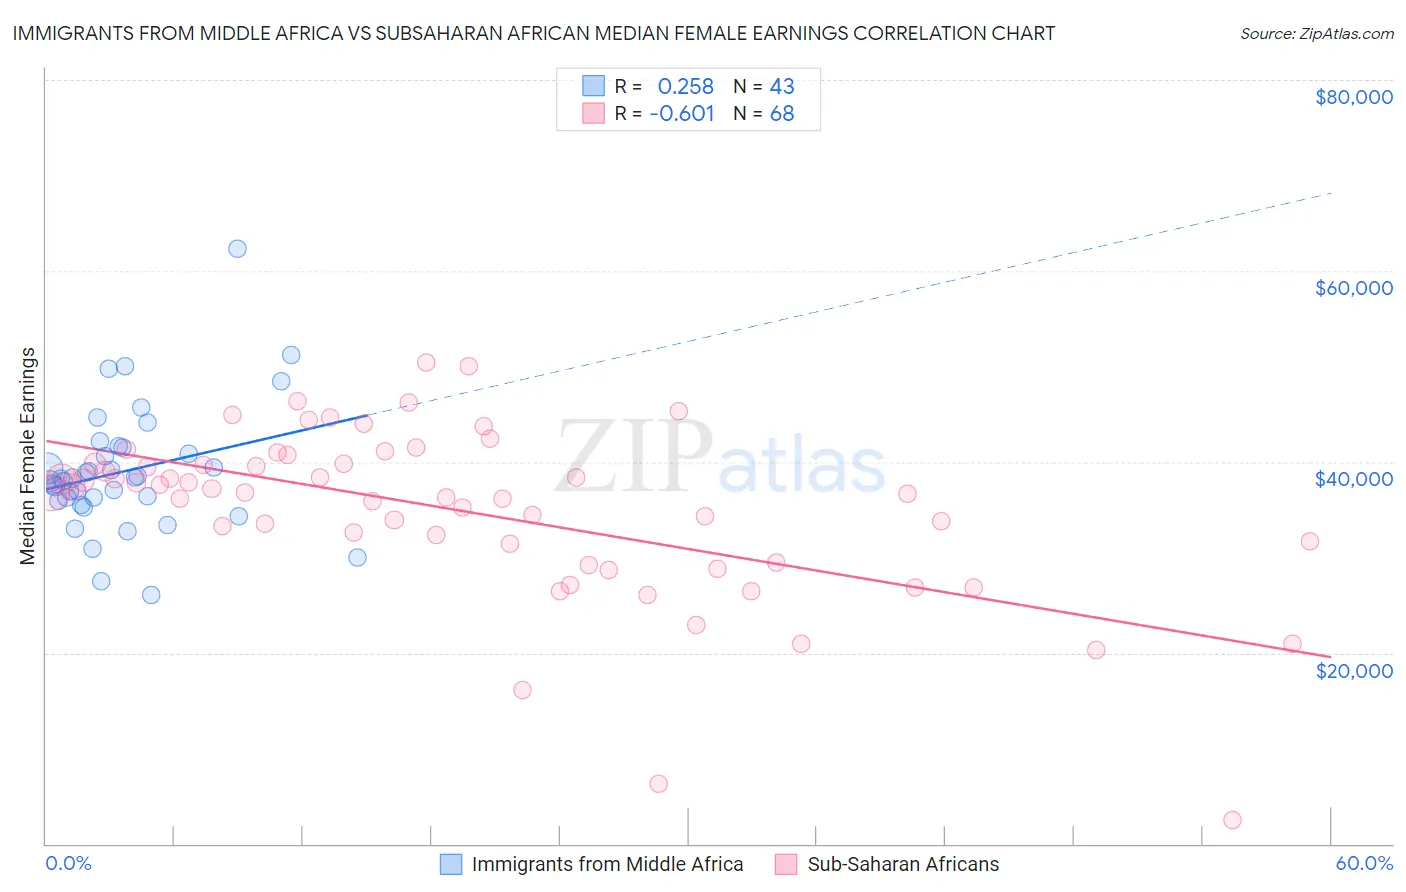 Immigrants from Middle Africa vs Subsaharan African Median Female Earnings